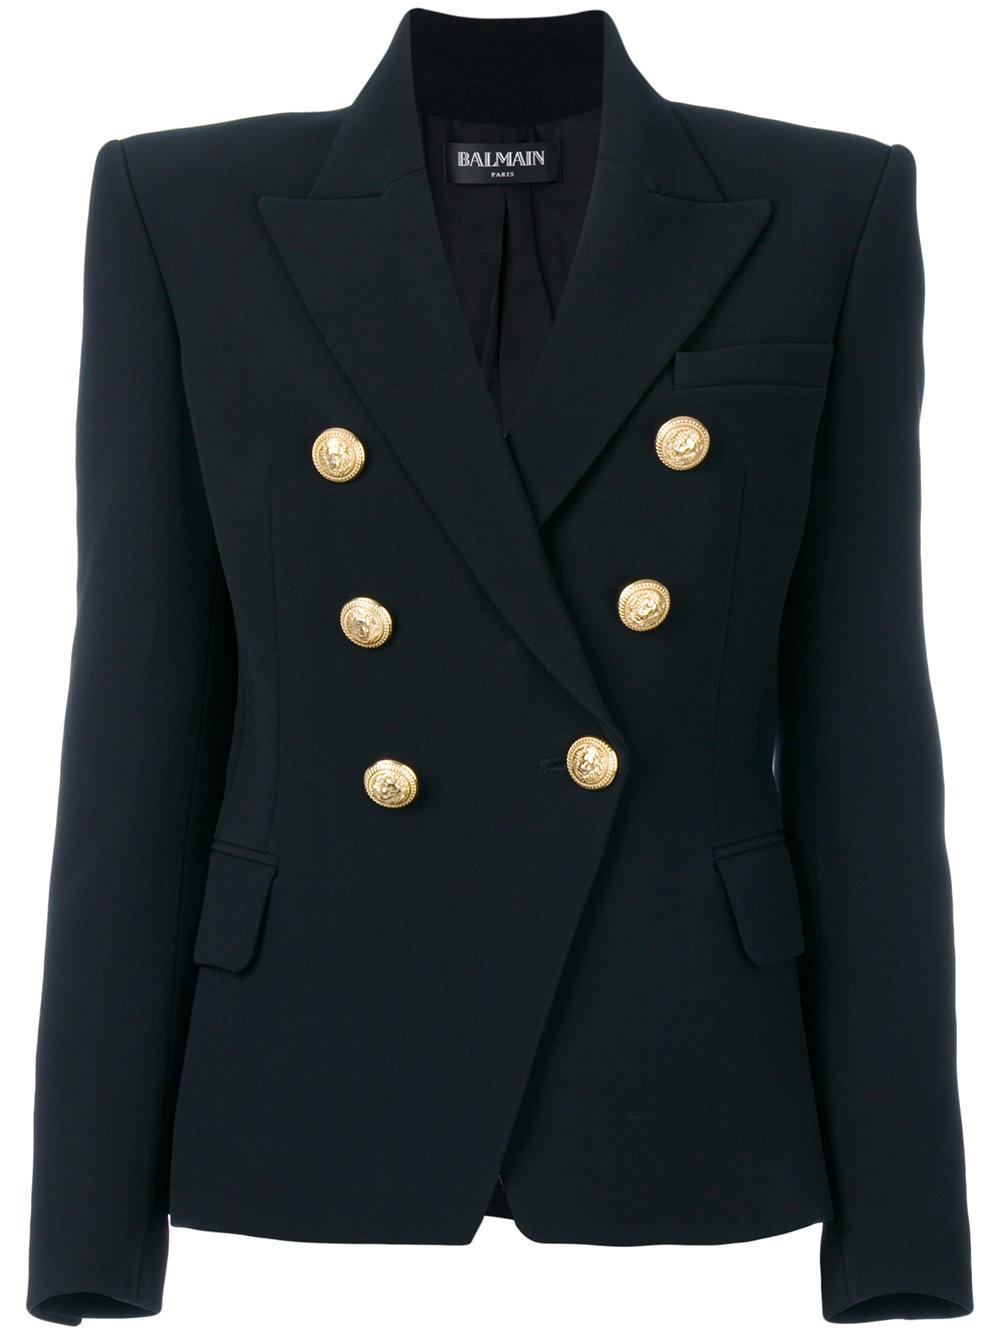 Black Blazer With Gold Buttons : Missguided military gold button blazer ...